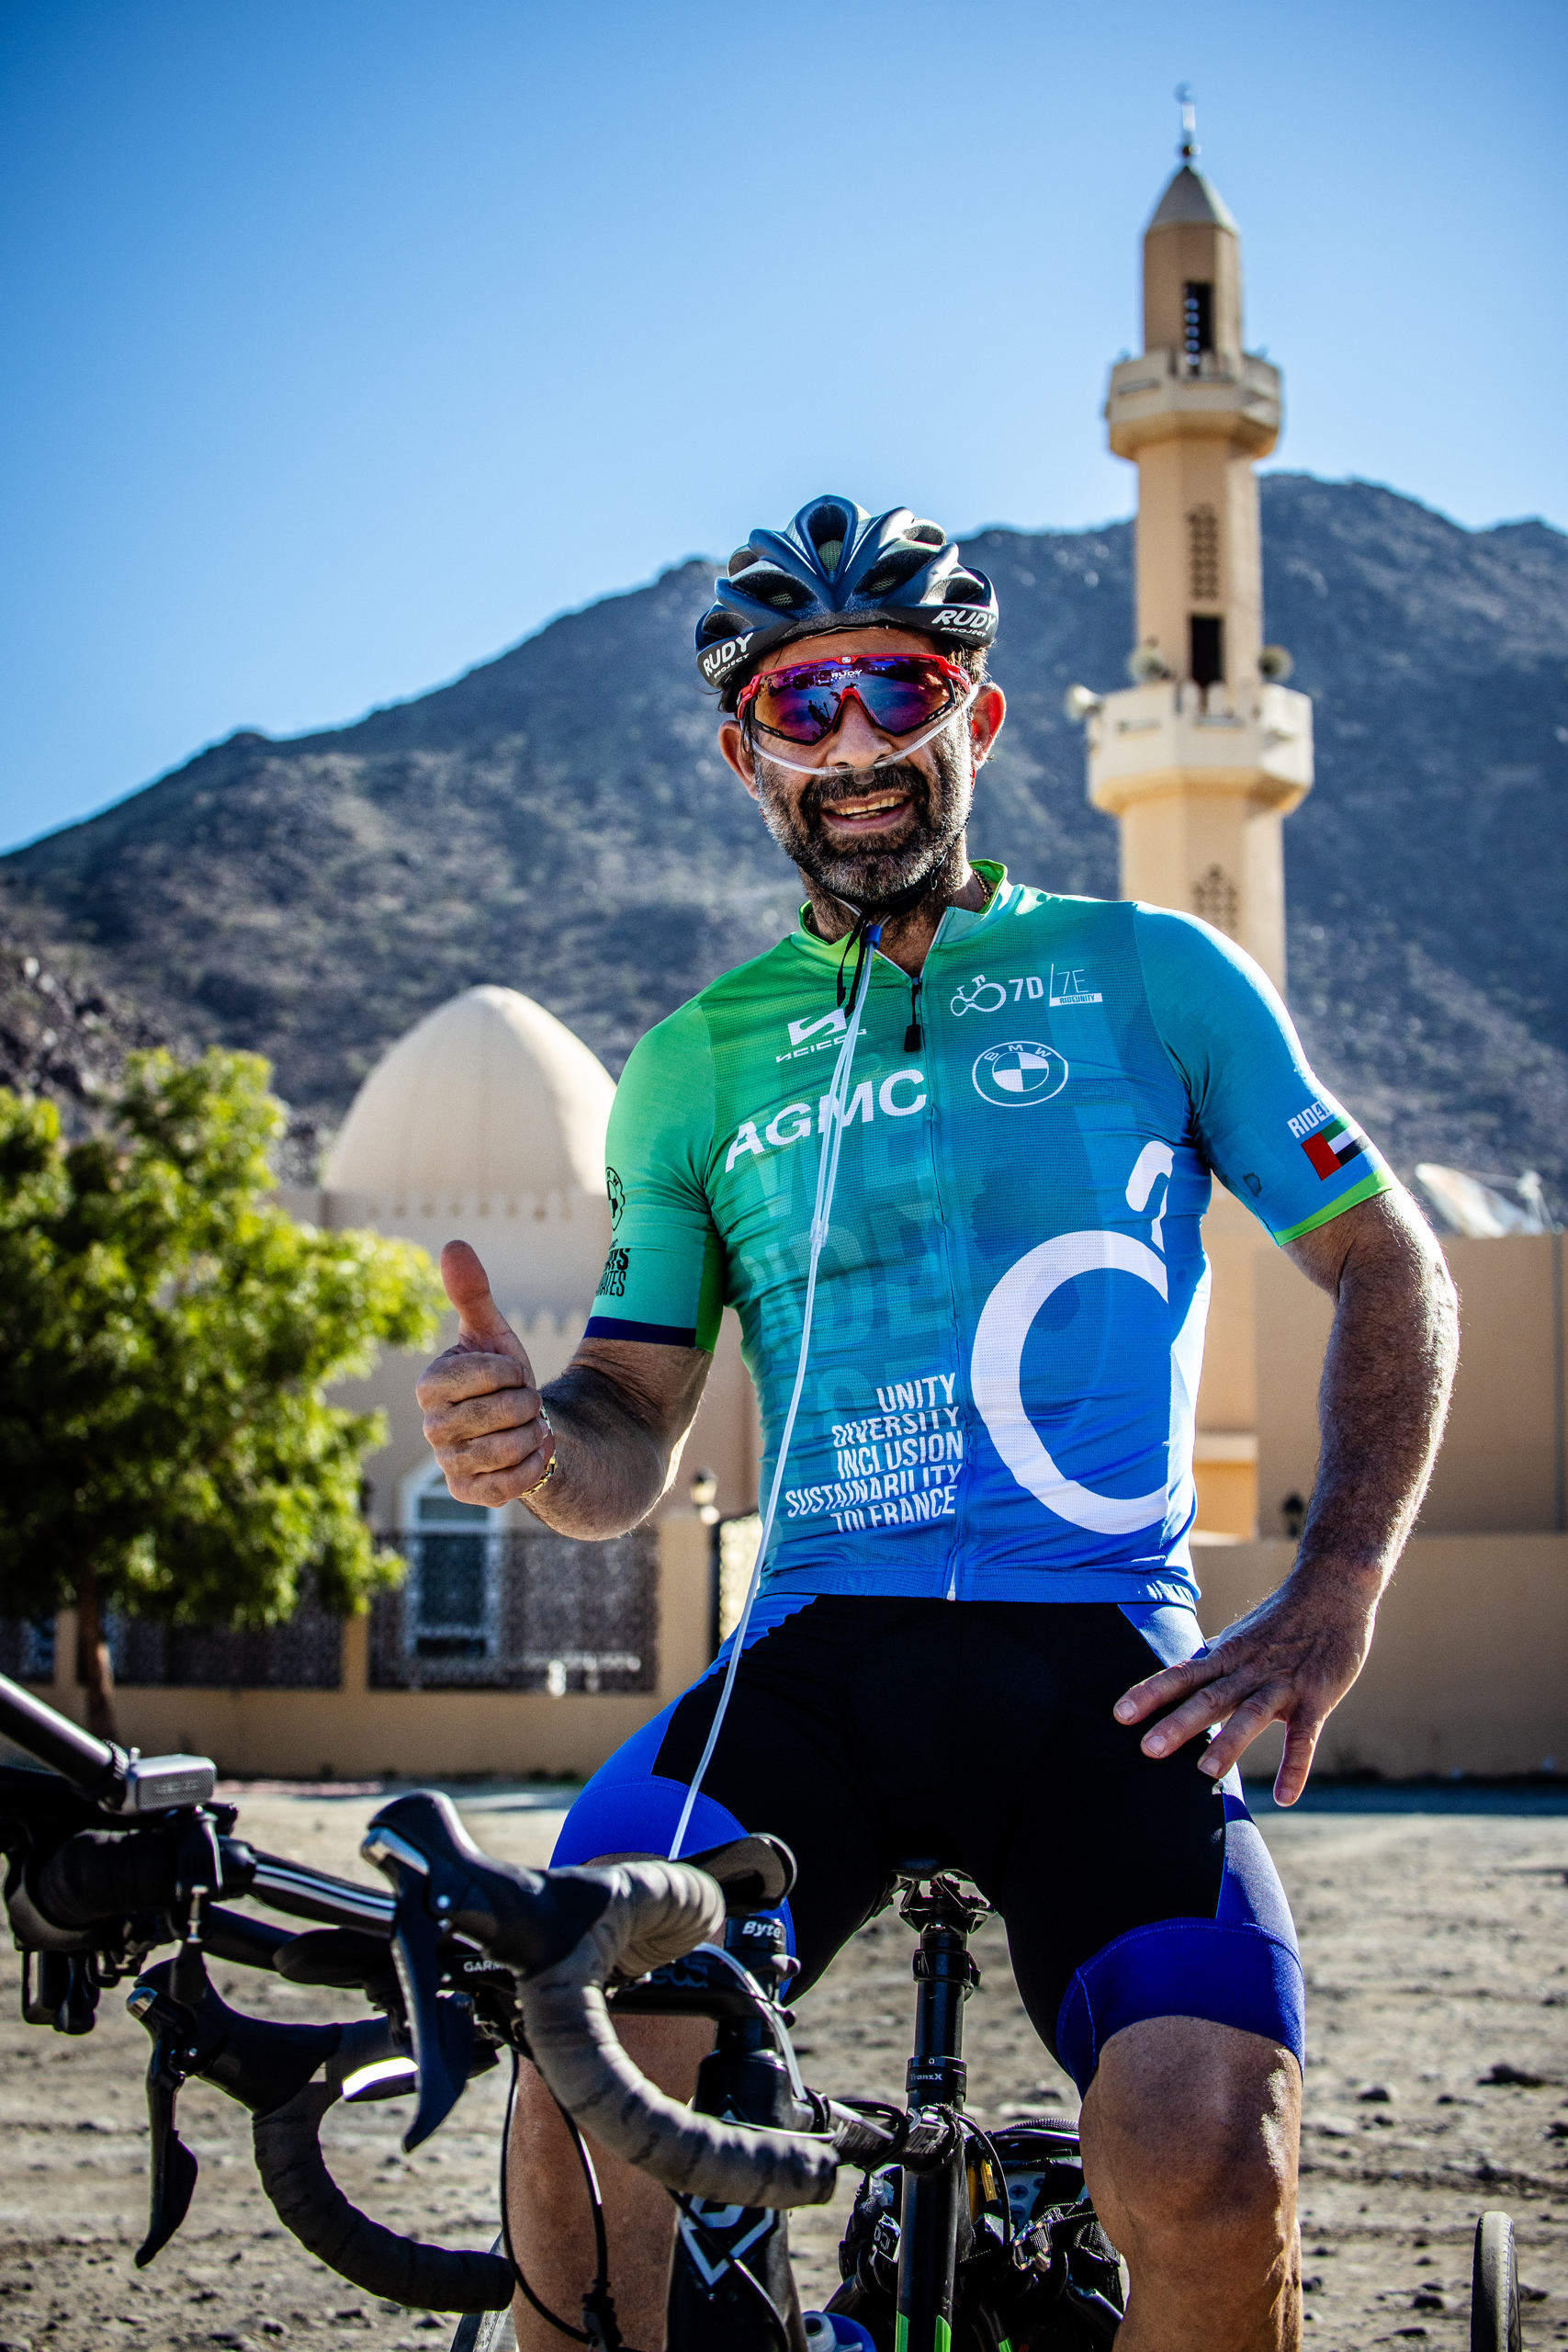 Carlo Calcagni - Ride for Unity - 7 Days 7 Emirates - Spreading the message of Diversity, Inclusion, Tolerance and Sustainability.